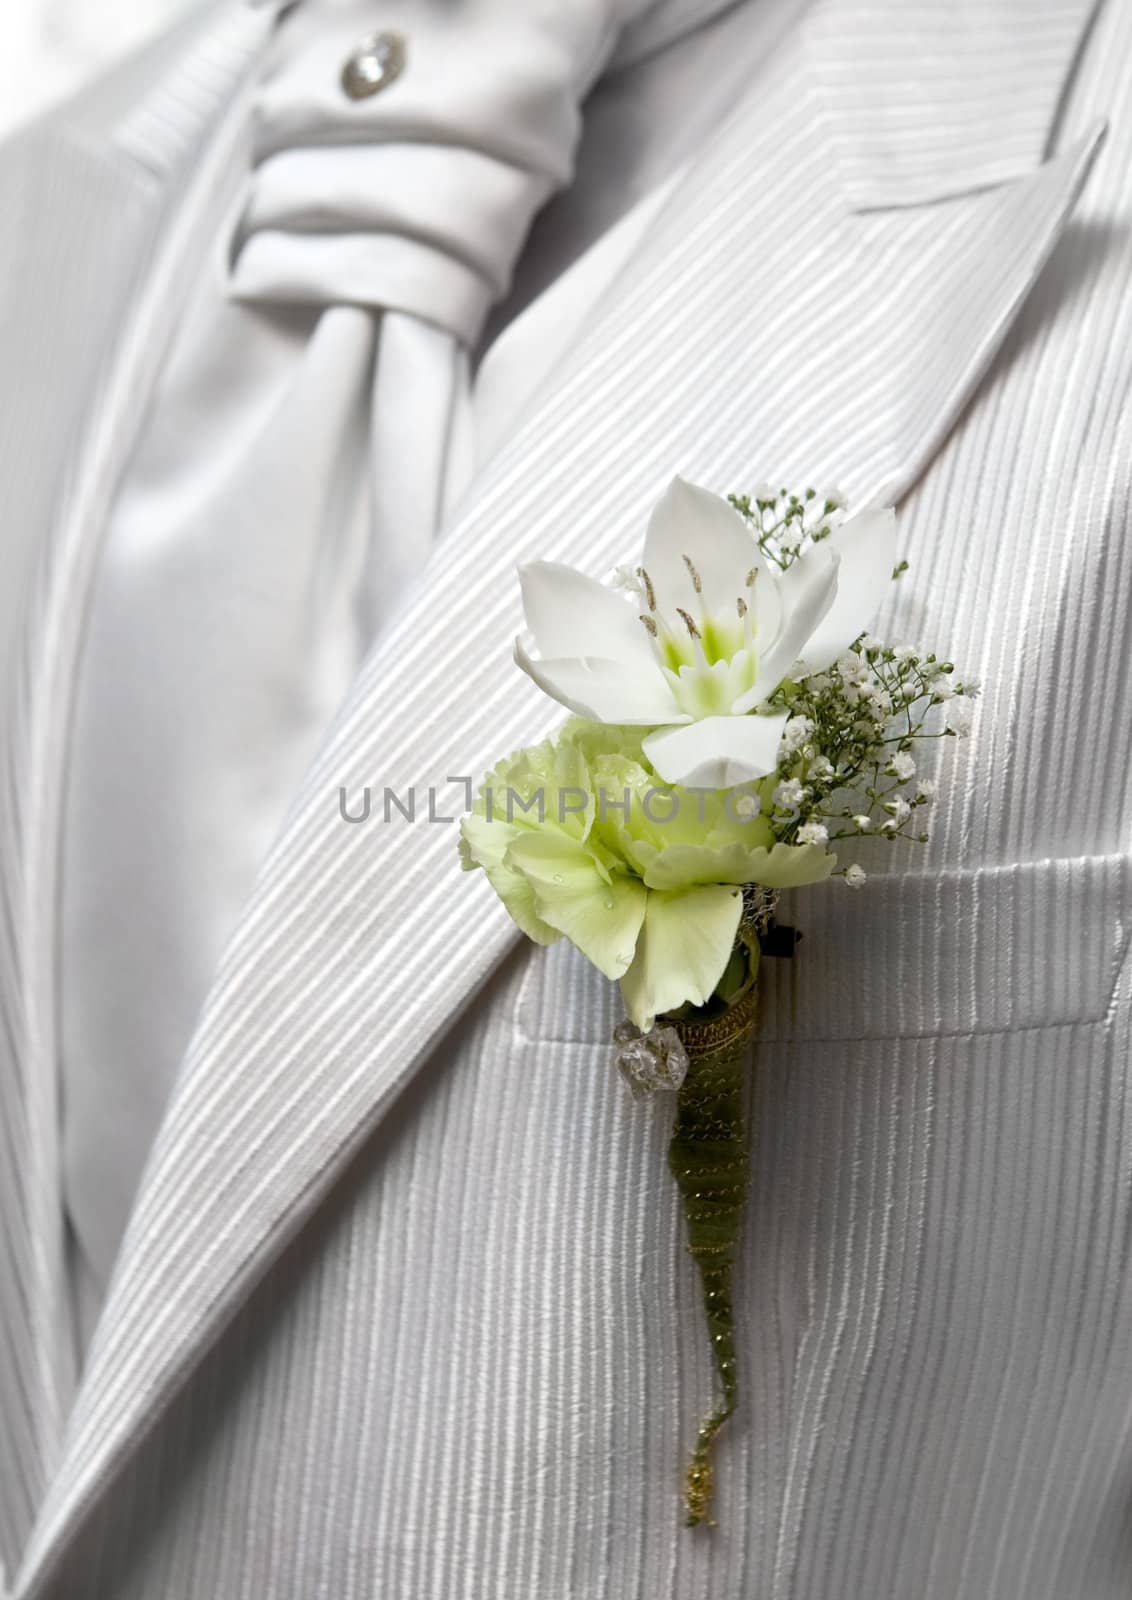 Closeup shot of flower in buttonhole. Groom suit